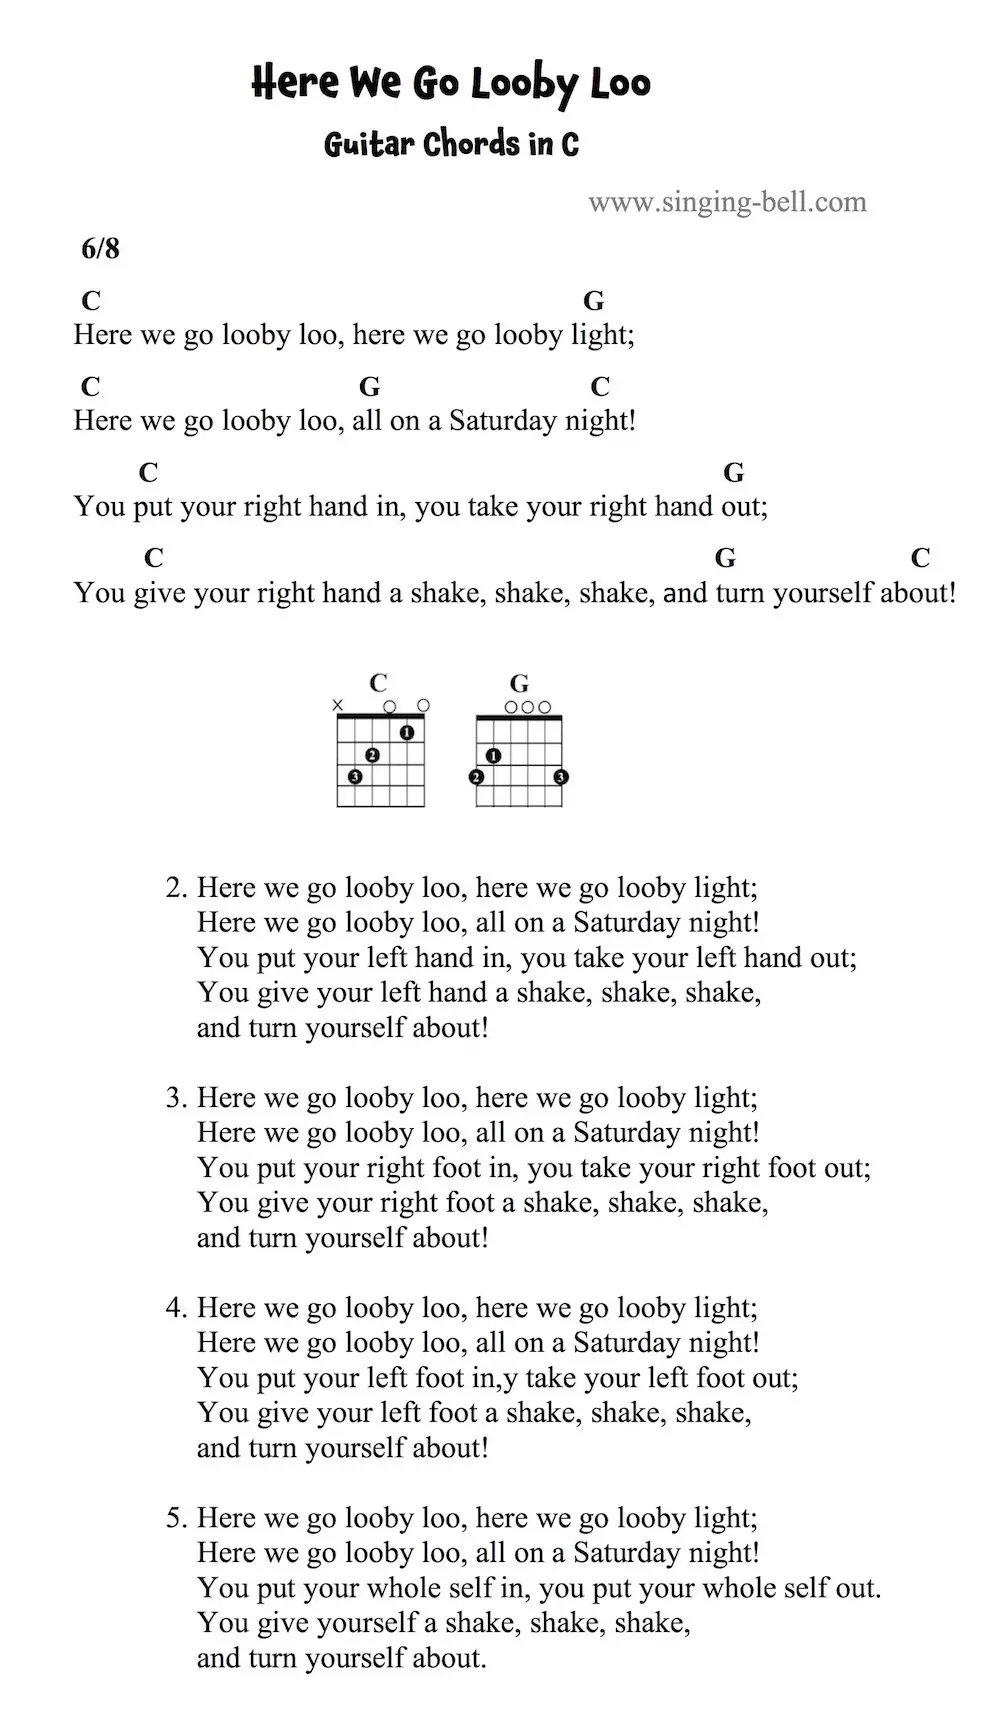 Here We Go Looby Loo - Guitar Chords and Tabs in C.